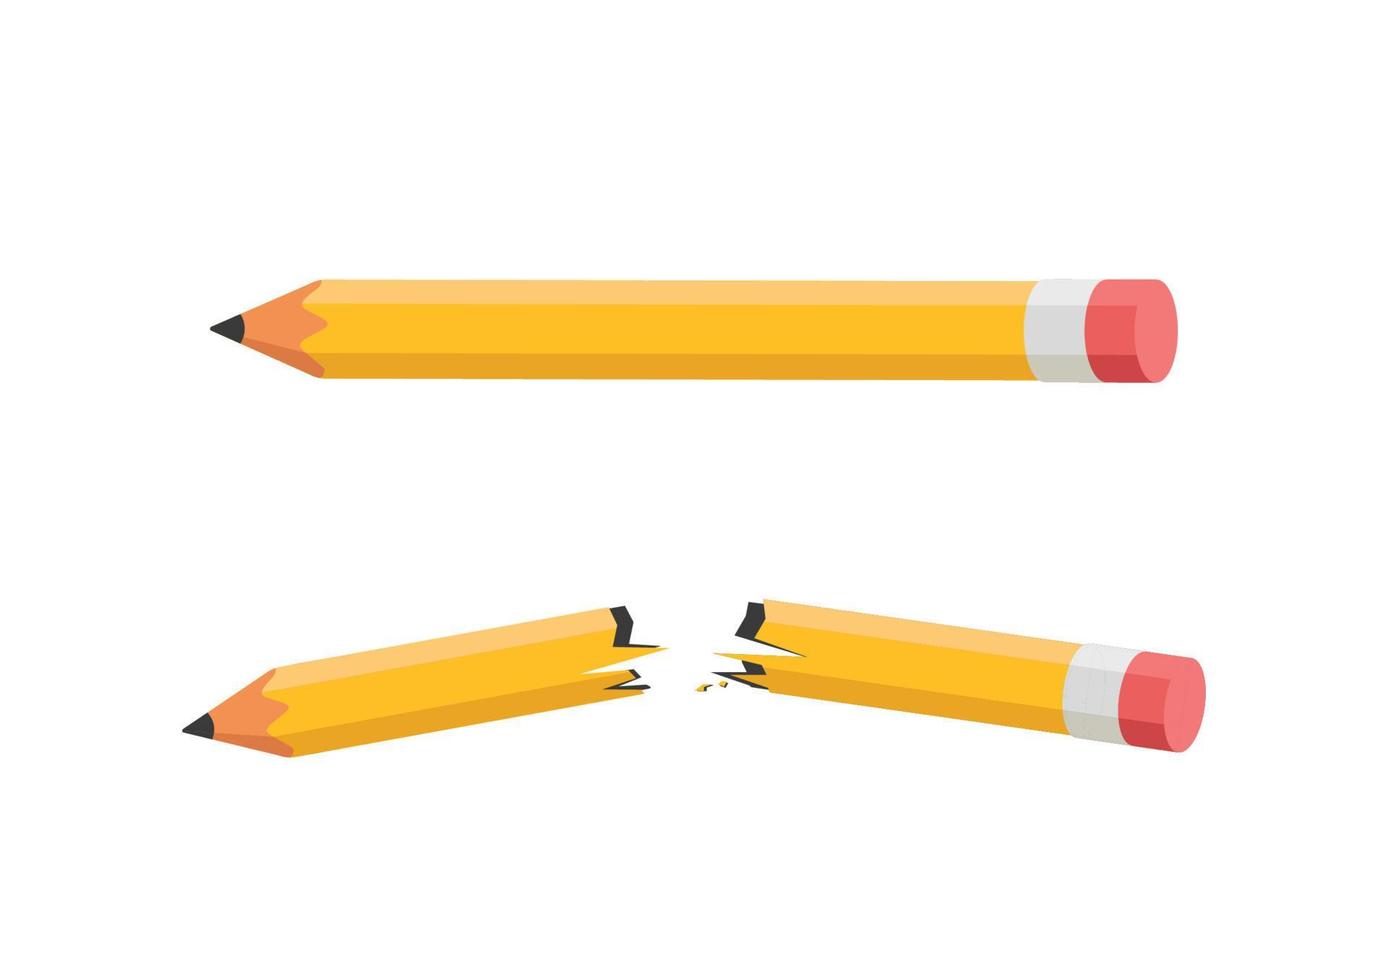 Broken pencil vector design. Cracked pencil isometric 3d style vector illustration isolated on white background. Broken pencil clipart. Anxiety, anger, stress, frustration, failure concept clipart